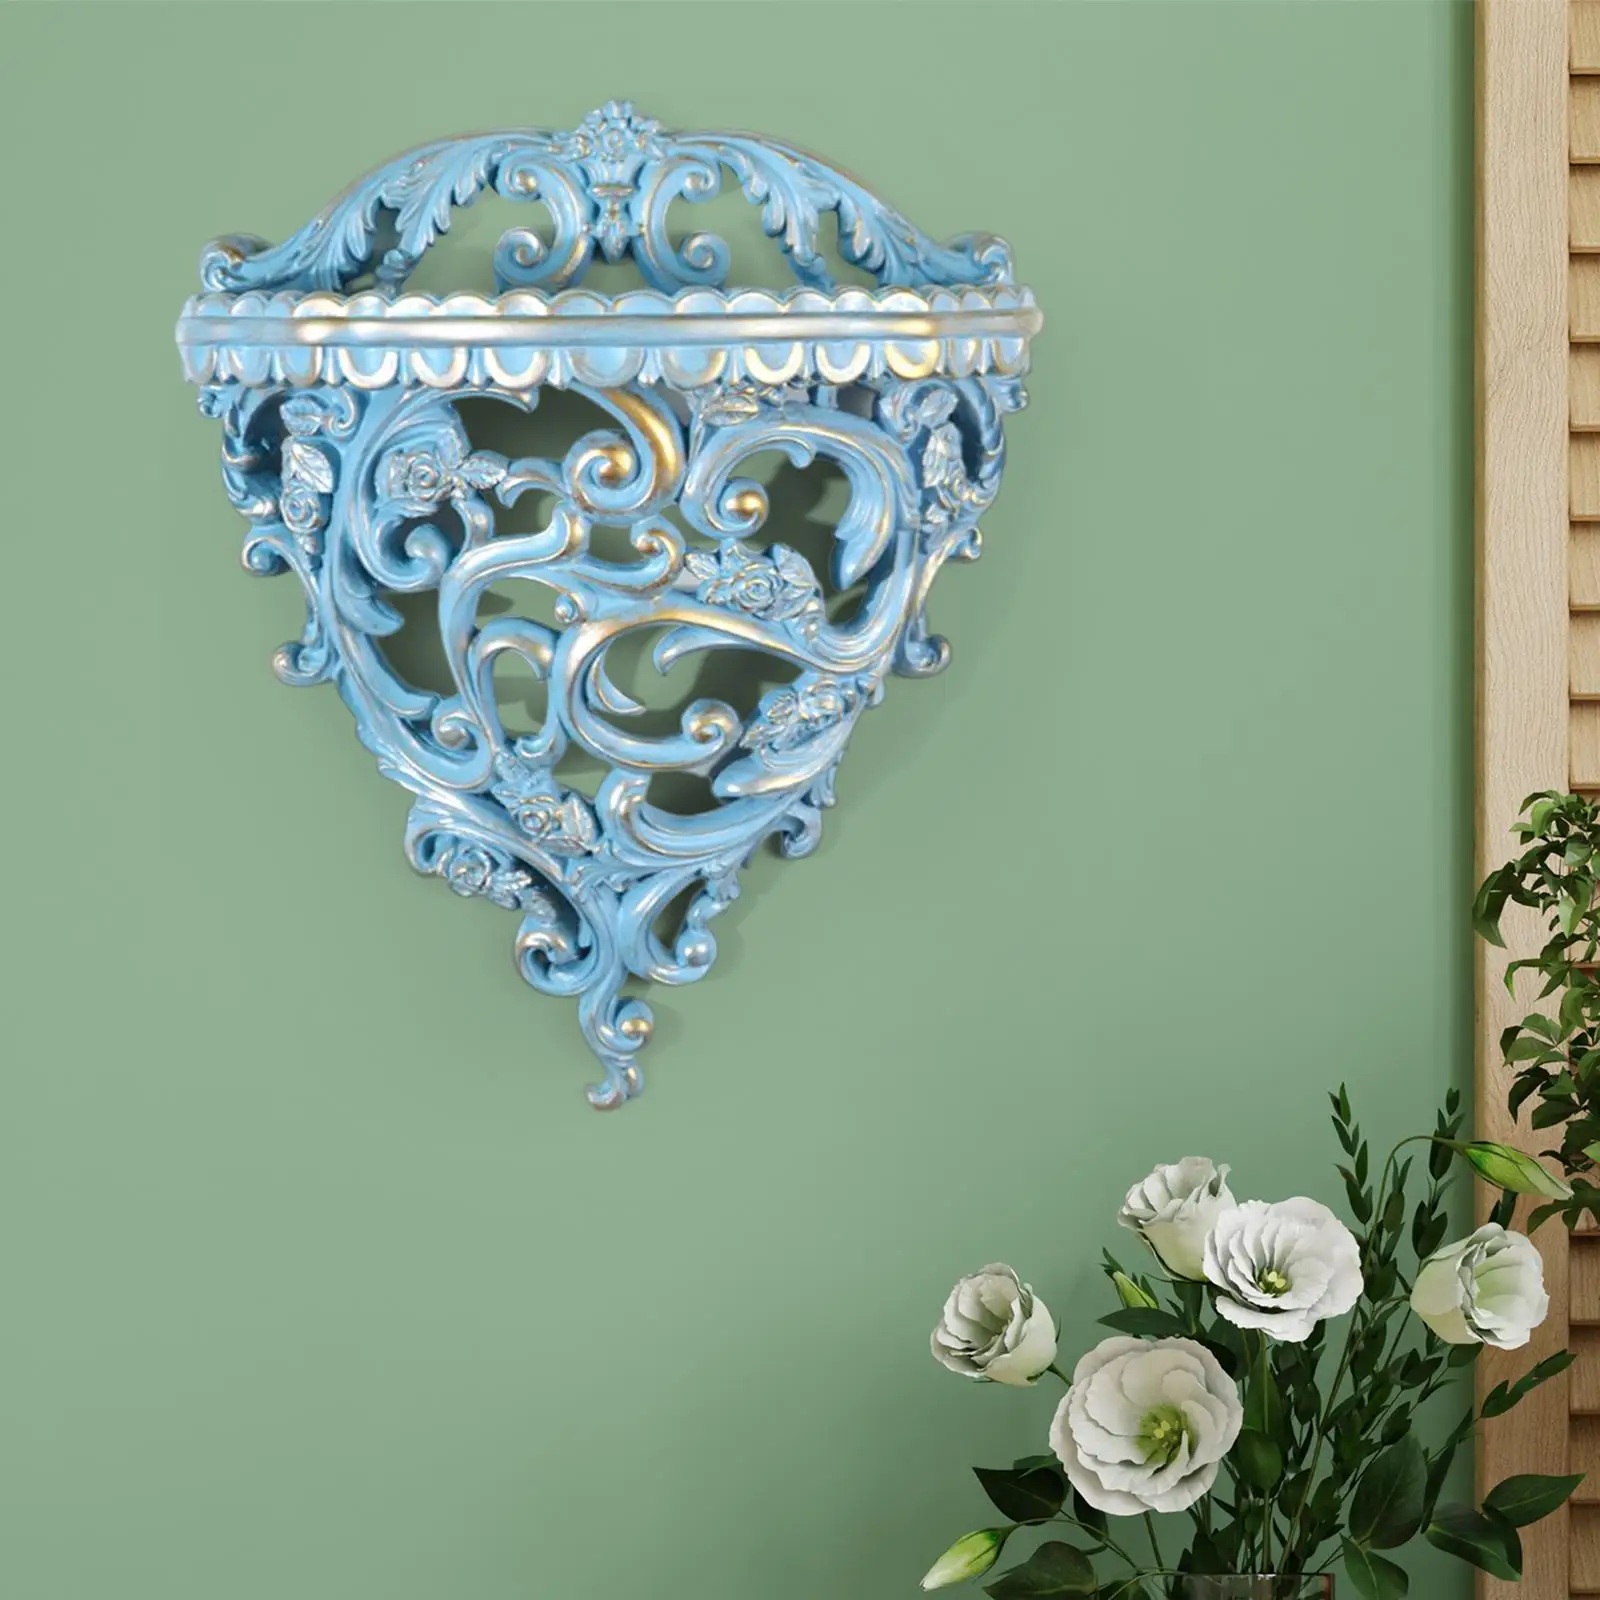 Retro Wall Floating Shelf Wall Organizer Decorative Hollow Flower Carving Wall Antique for Bedroom Living Room Home Office